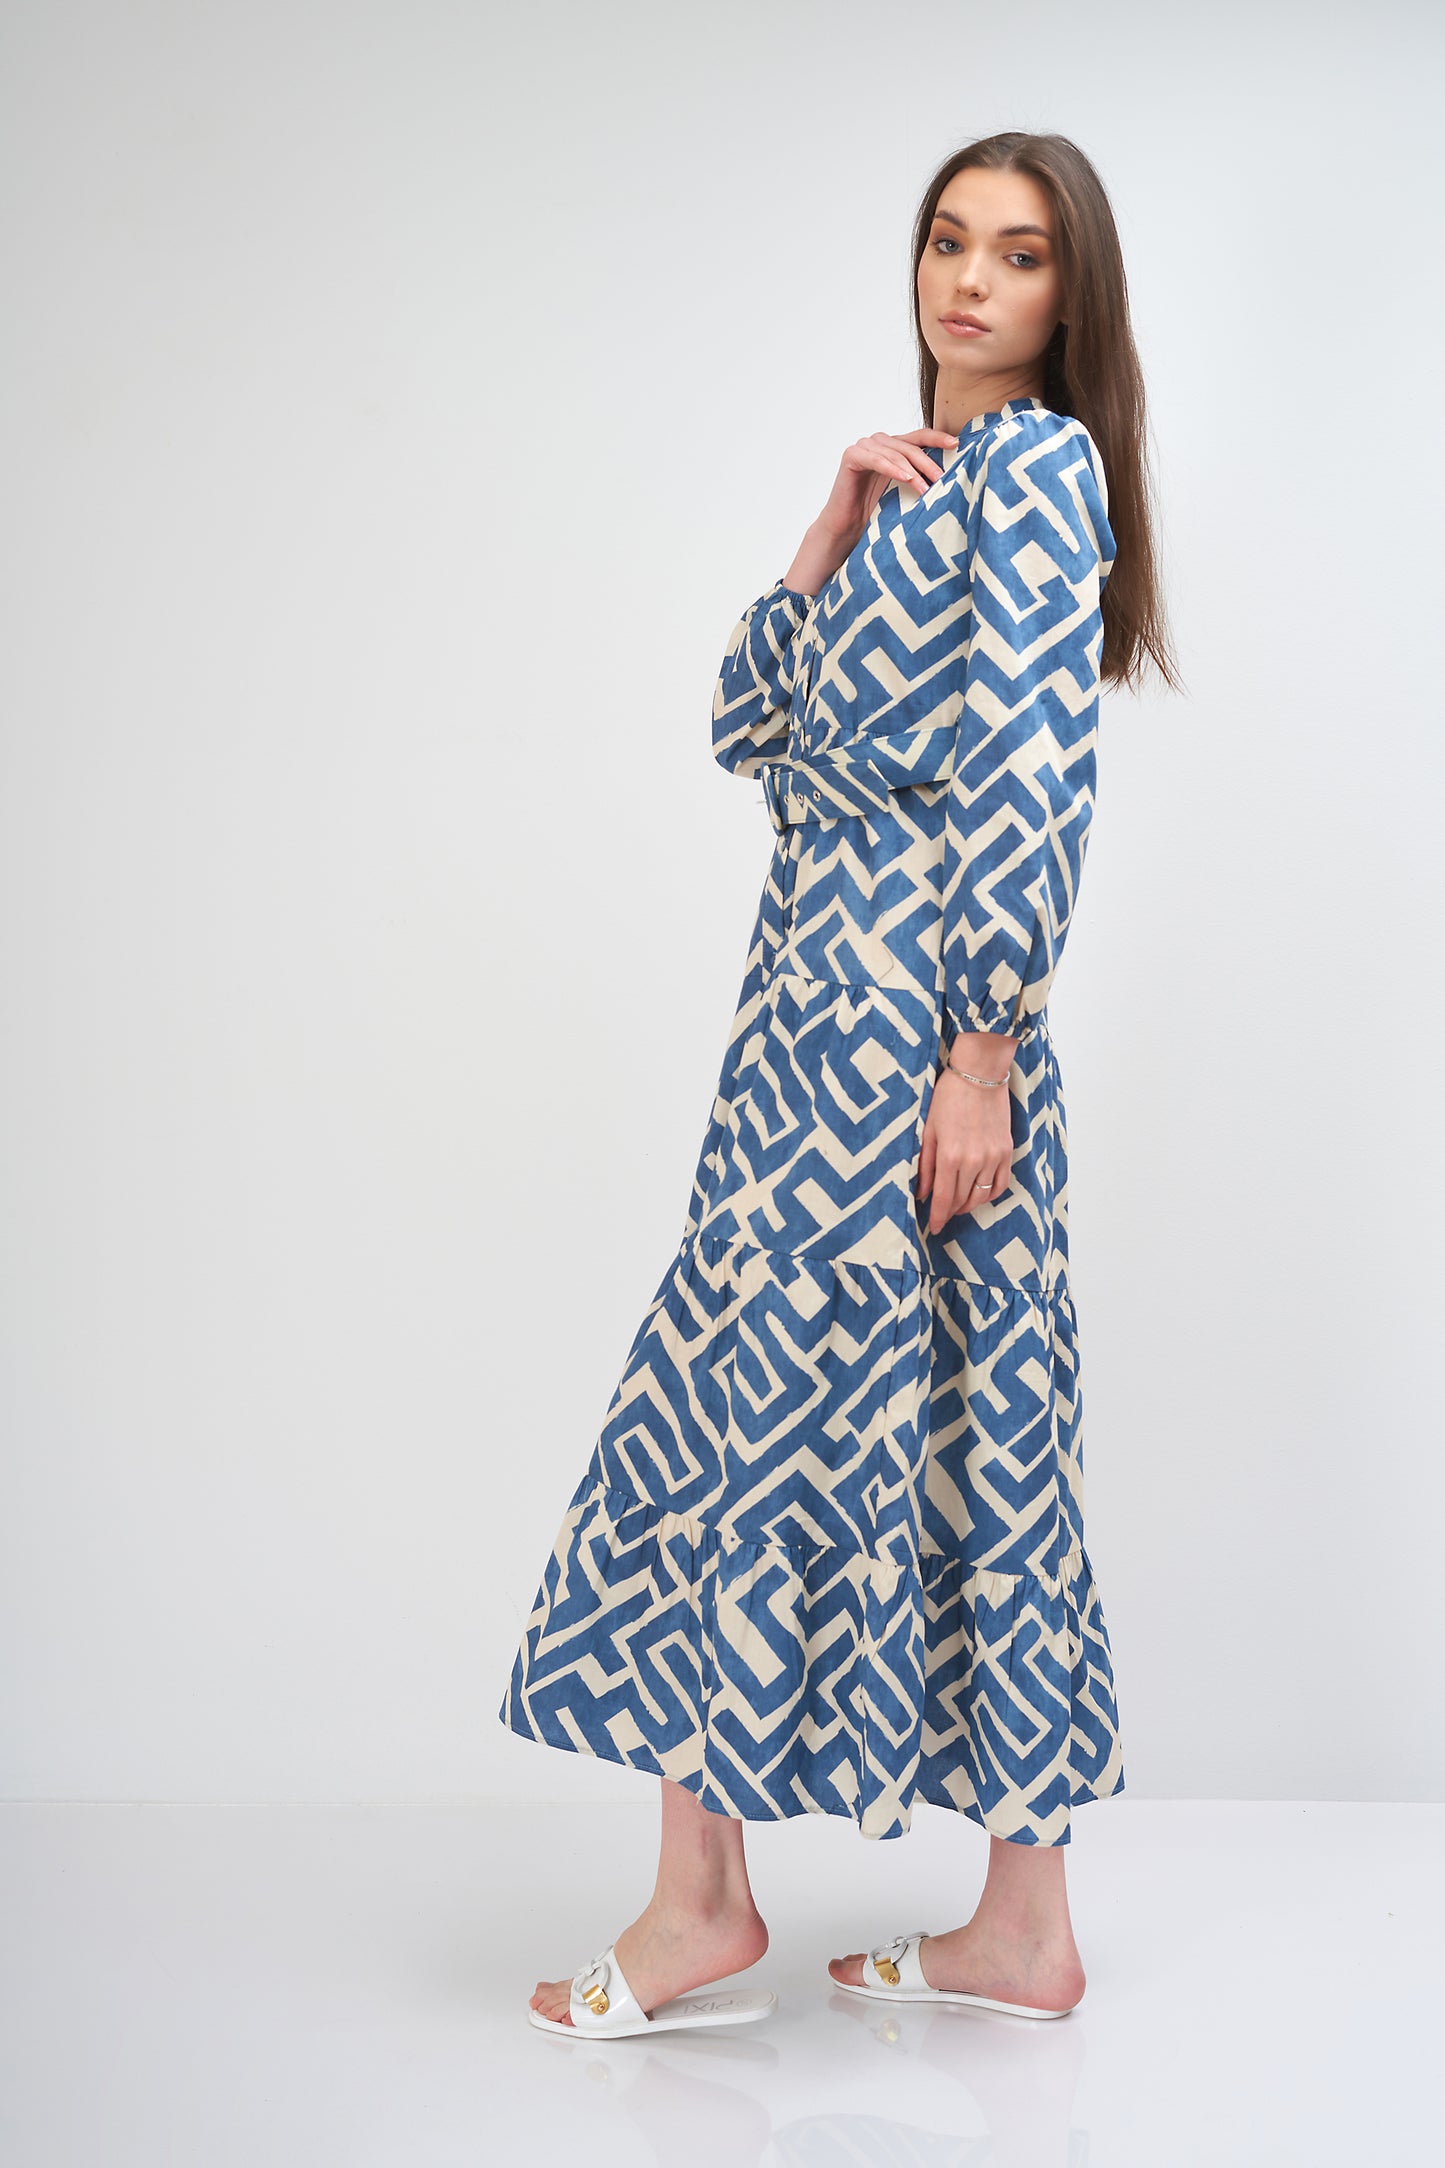 Colorful dress - (with a zigzag ) pattern